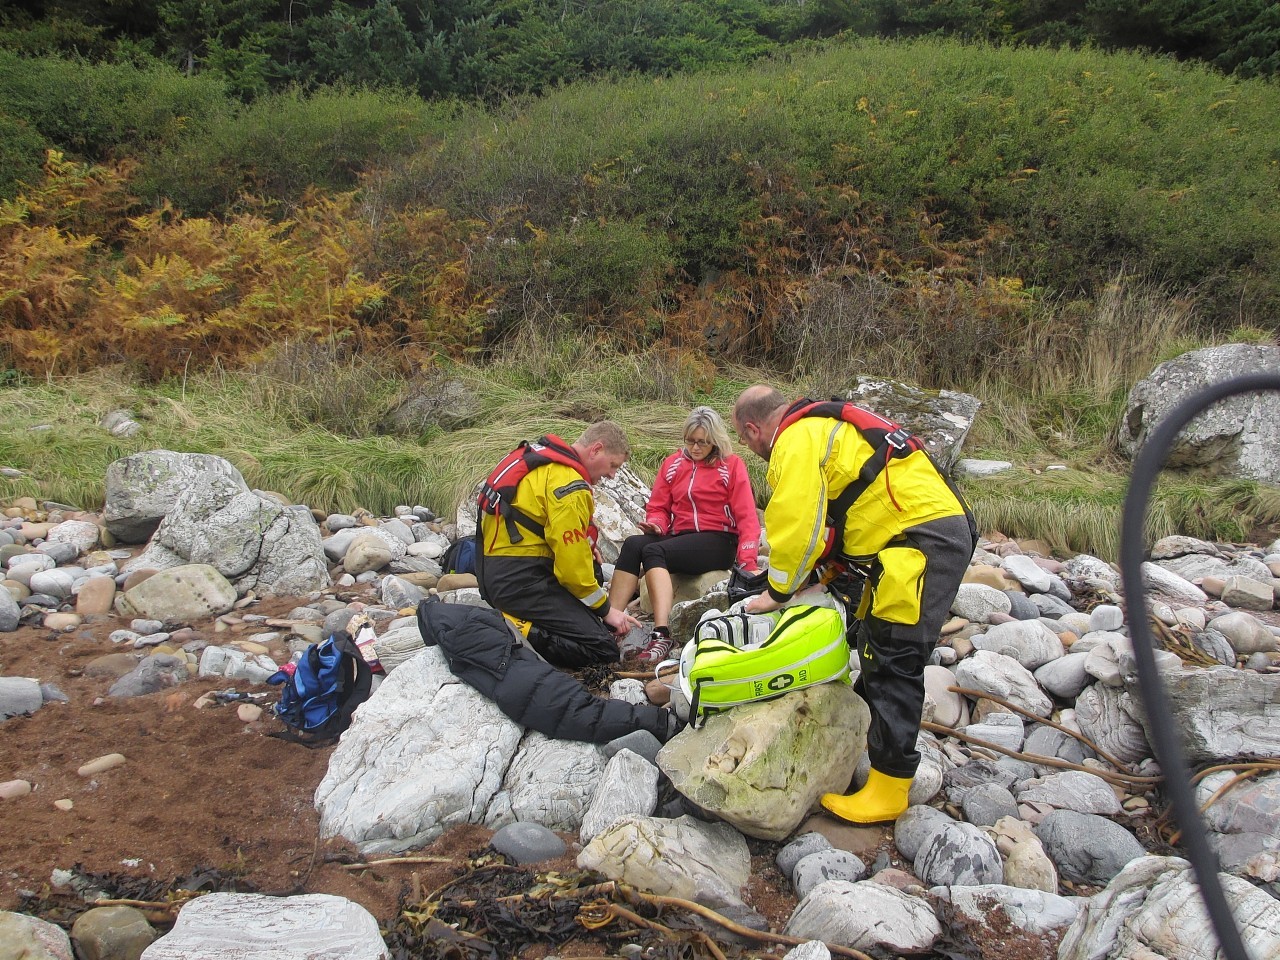 The rescue at the beach near Cromarty